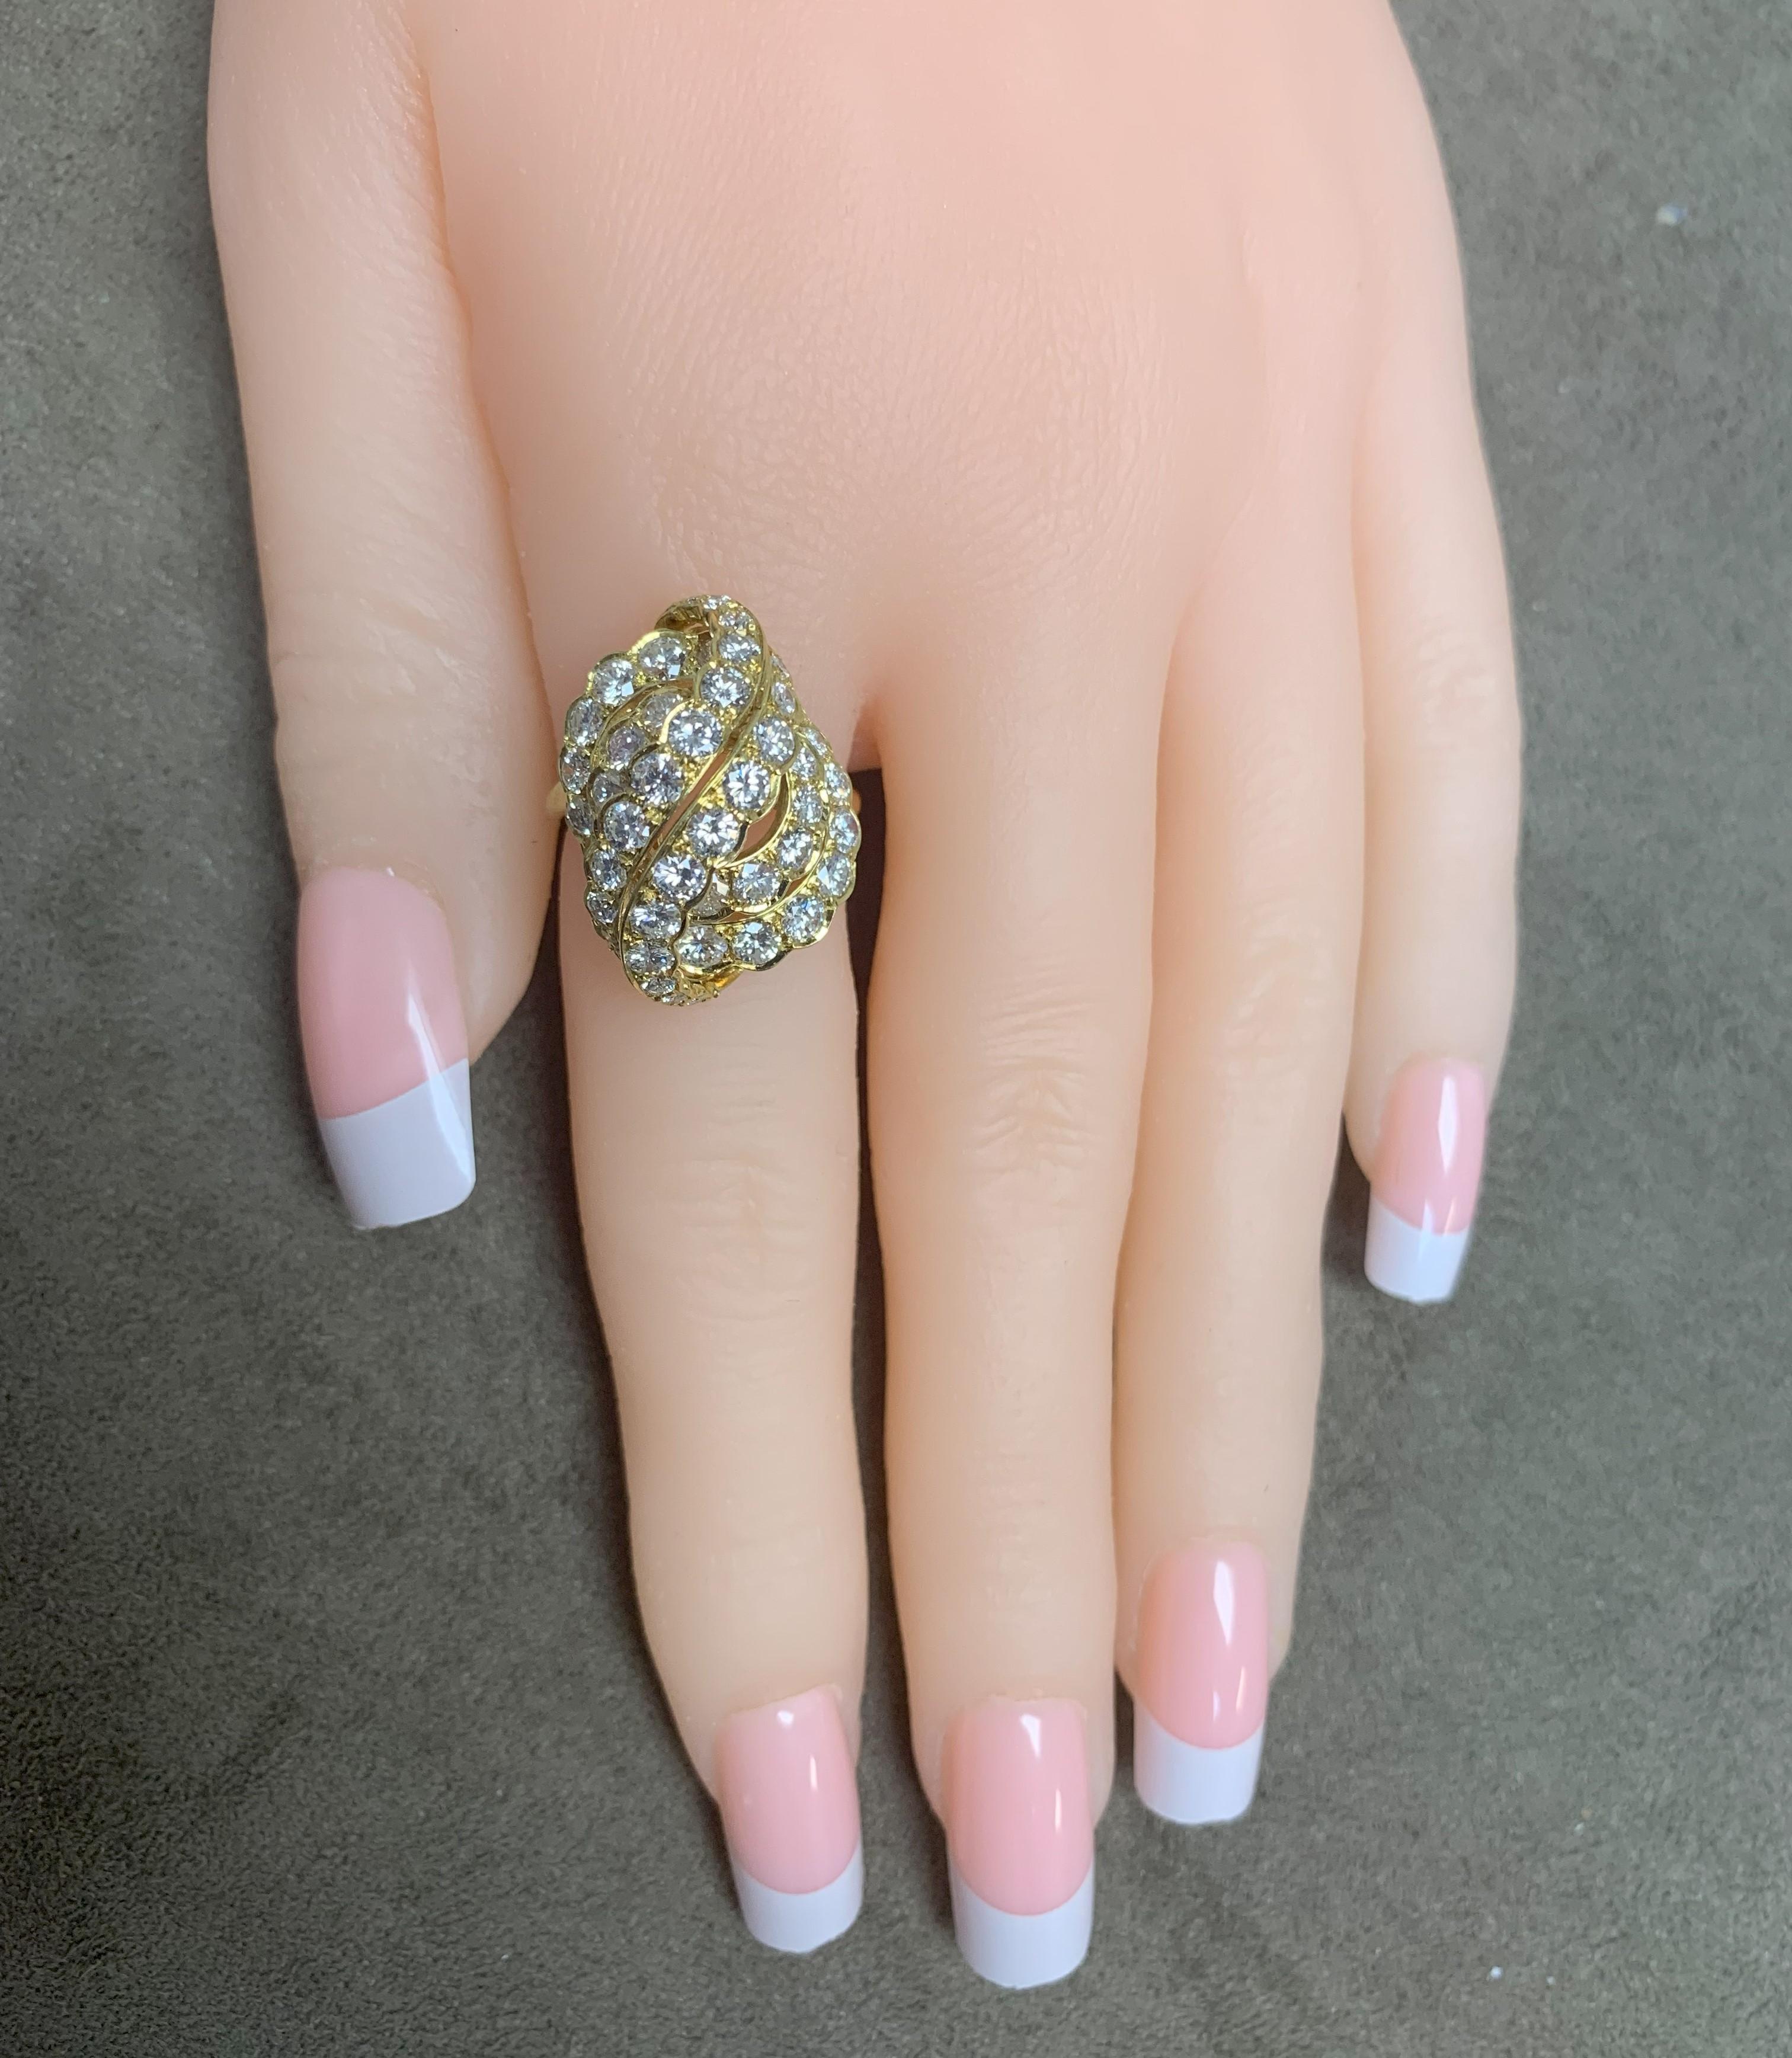 French Van Cleef & Arpels Diamond Cocktail Ring, 18k In Excellent Condition For Sale In New York, NY